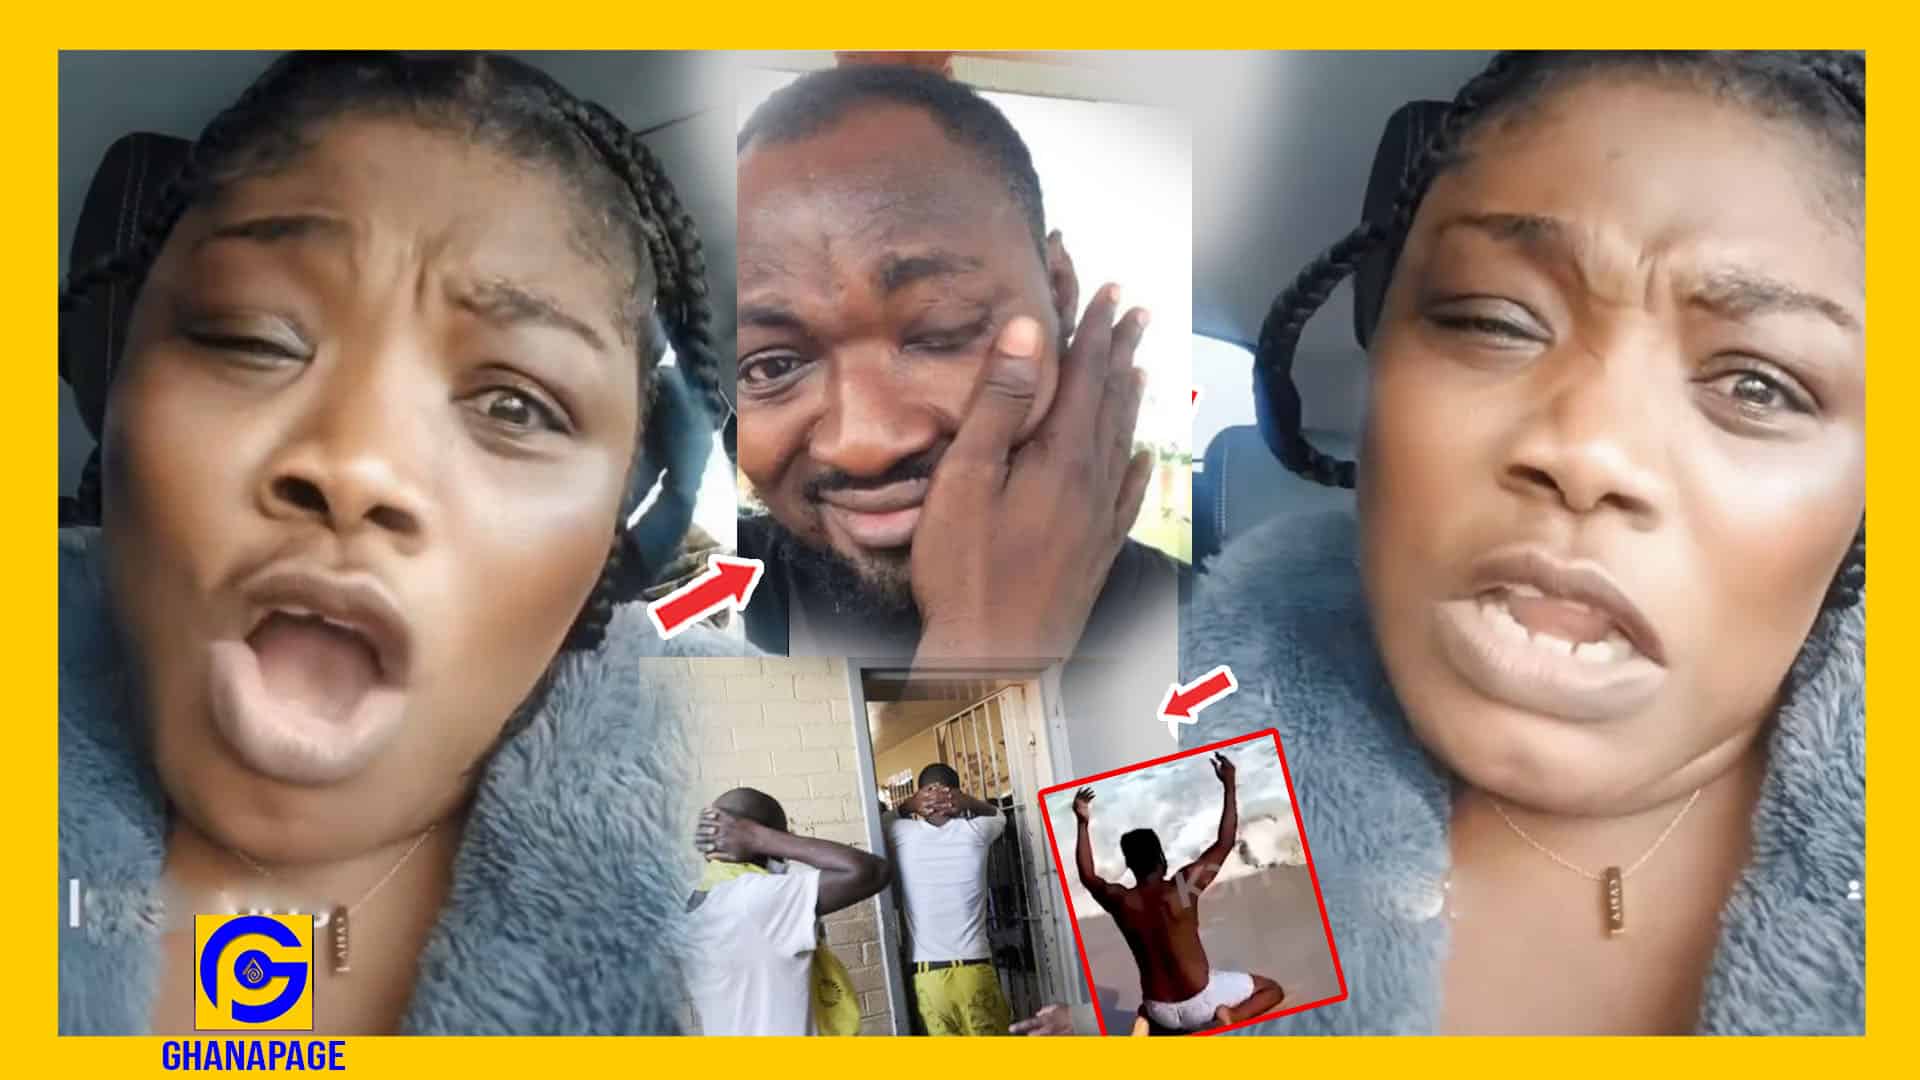 Go and work and stop fooling- Maa Linda slaps sense into Funny Face